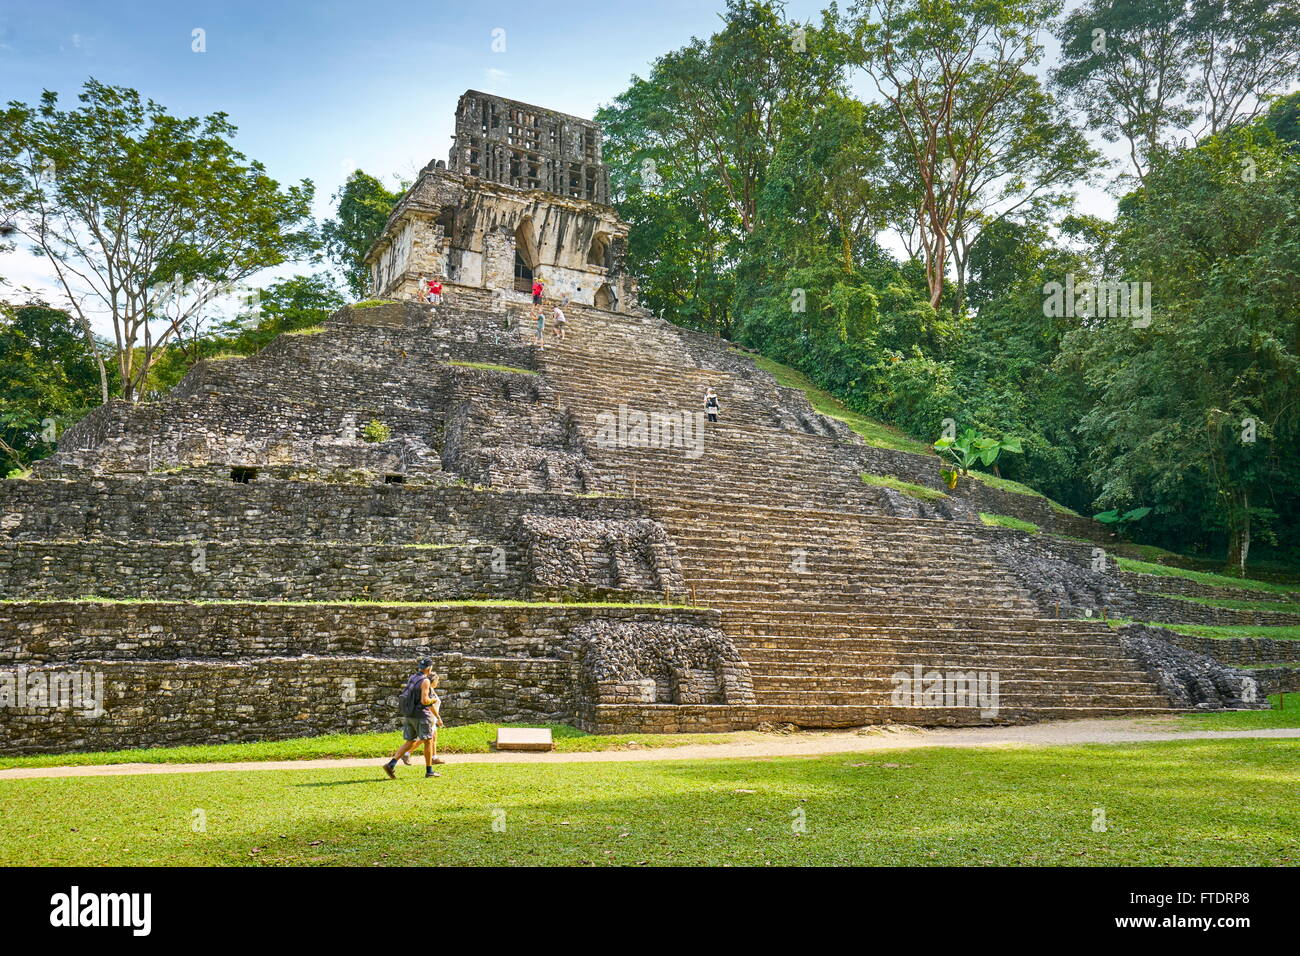 Temple of the Cross, ancient Mayan city of Palenque, Chiapas, Mexico Stock Photo